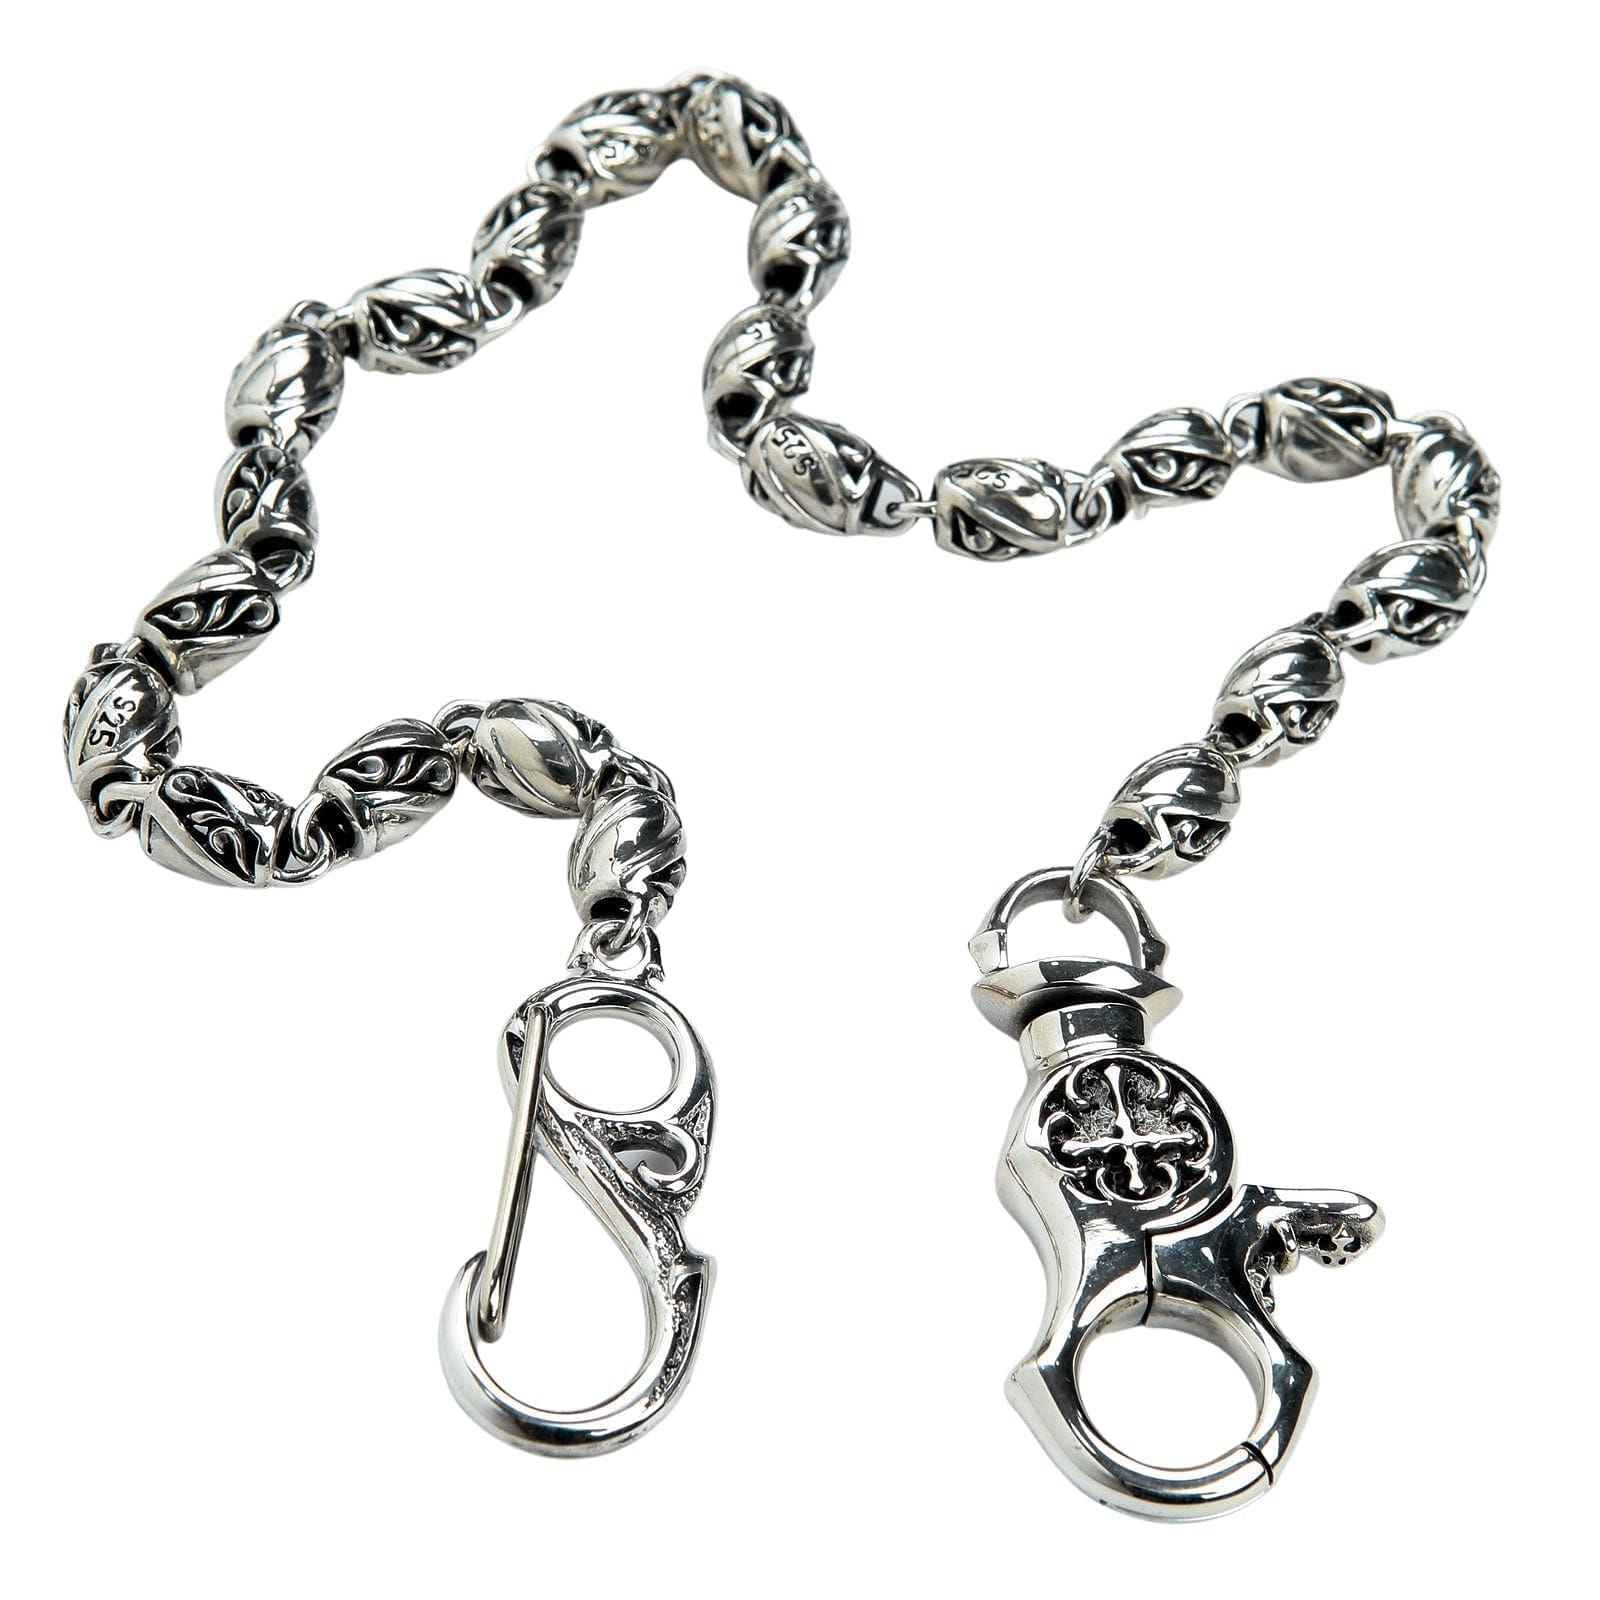 Wallet Chain for Biker Wallets - 20 - Silver Color - Motorcycle  Accessories - WTC4-DL